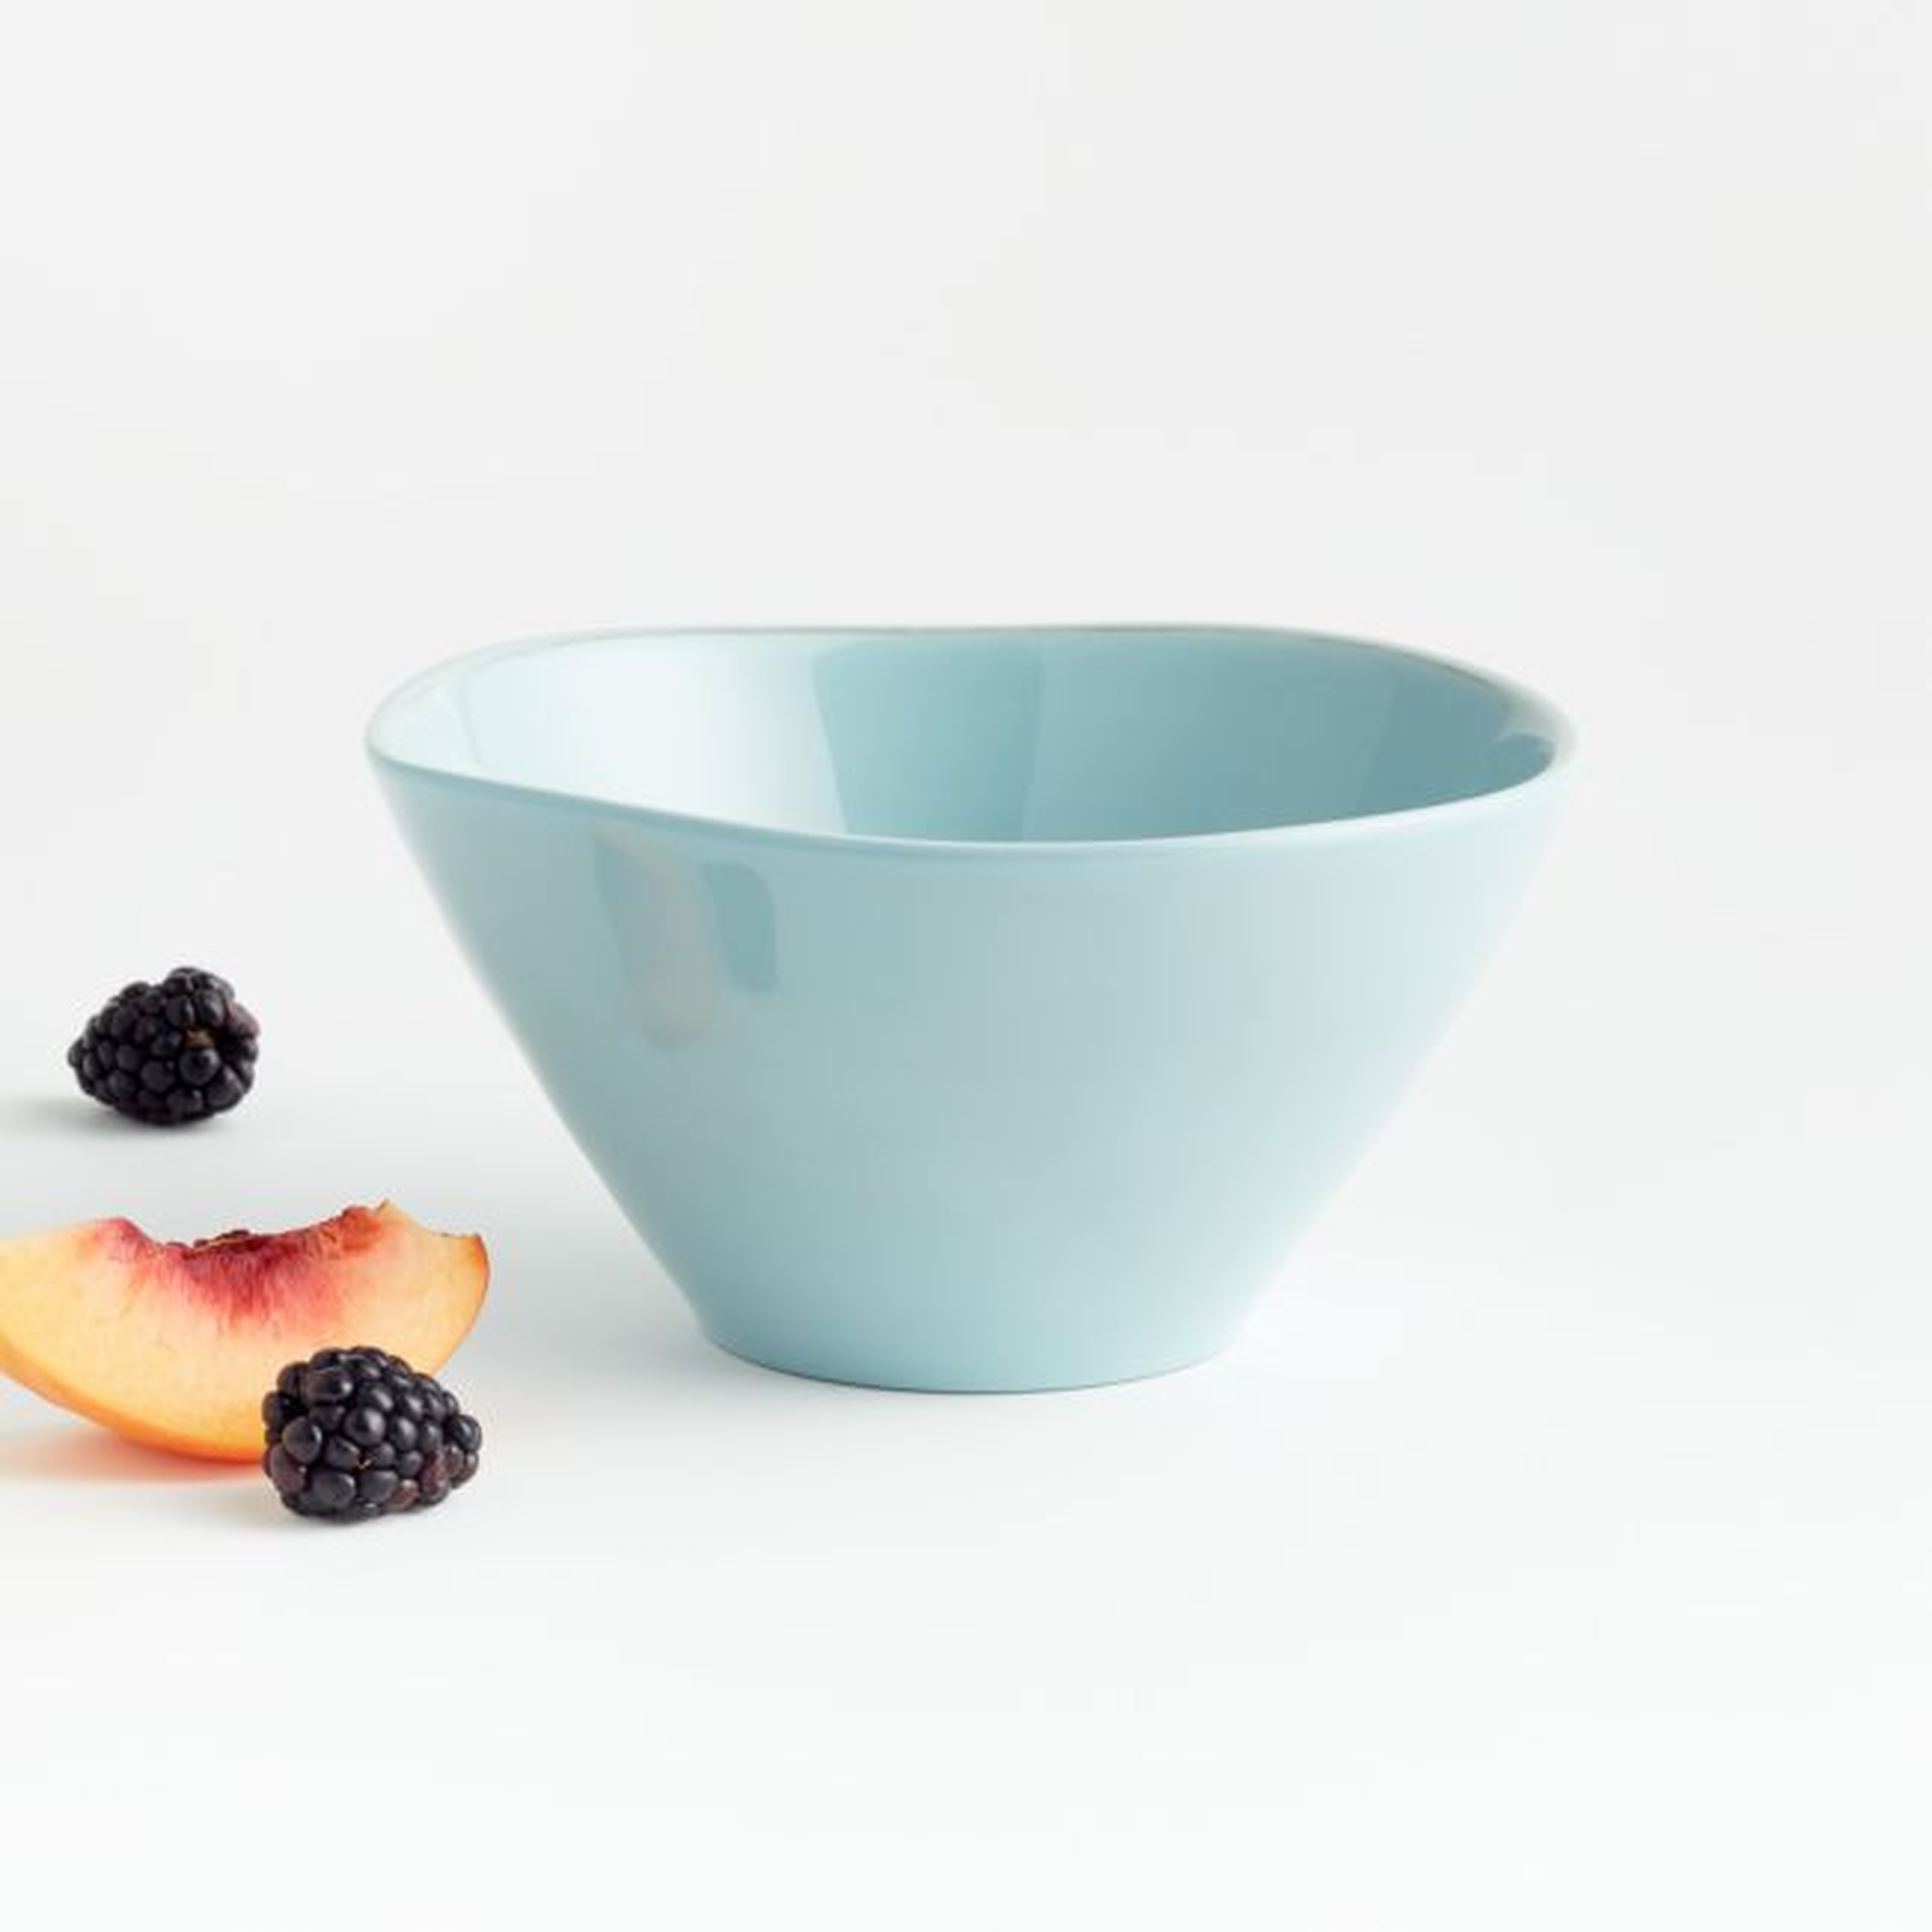 Marin Blue Outdoor Melamine Bowl - Crate and Barrel